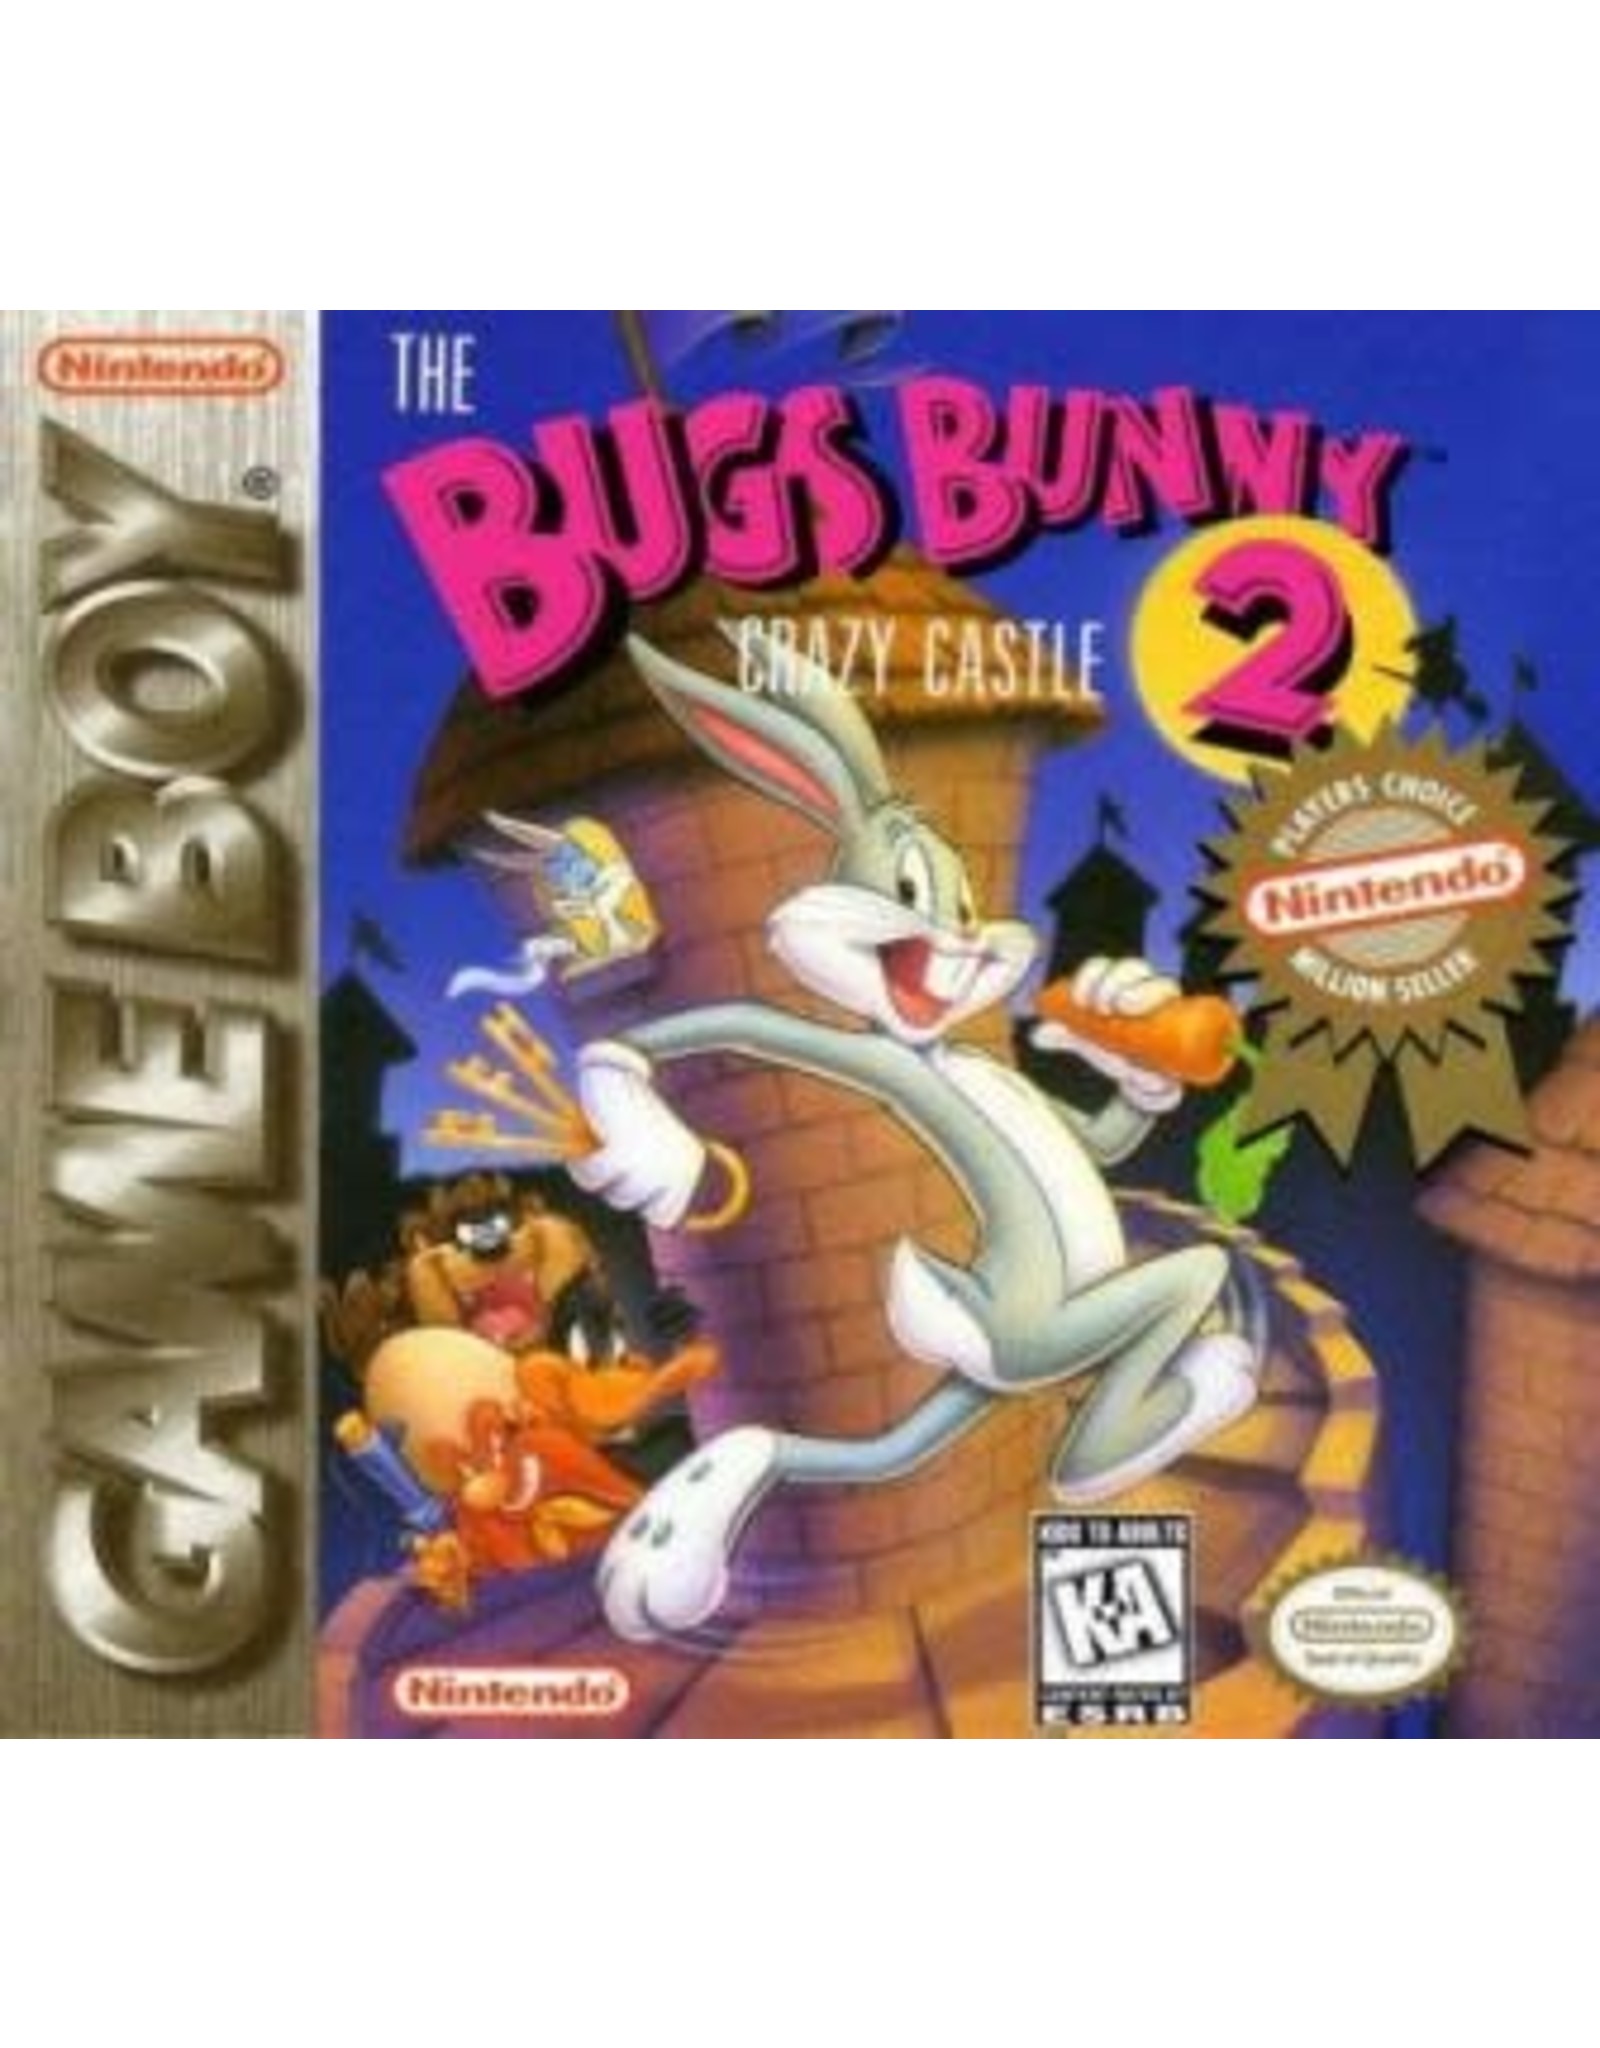 Game Boy Bugs Bunny Crazy Castle 2 (Player's Choice, Cart Only)